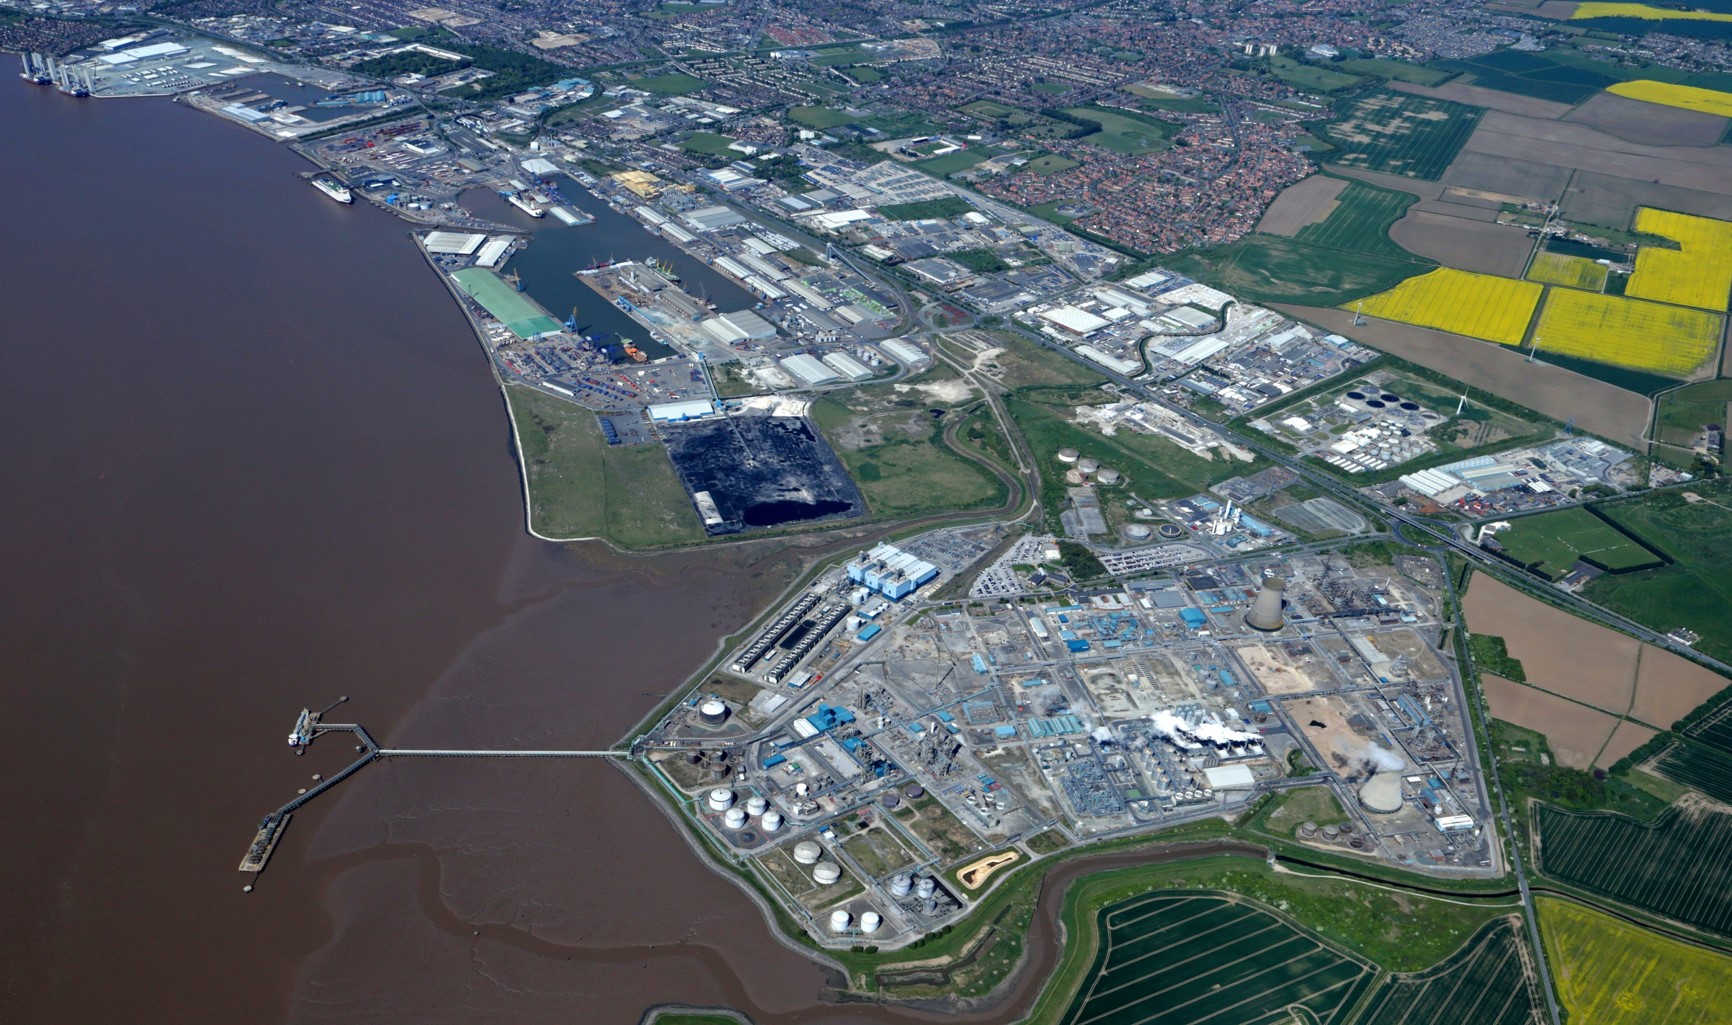 View from the Humber 2022 and Humber Freeport